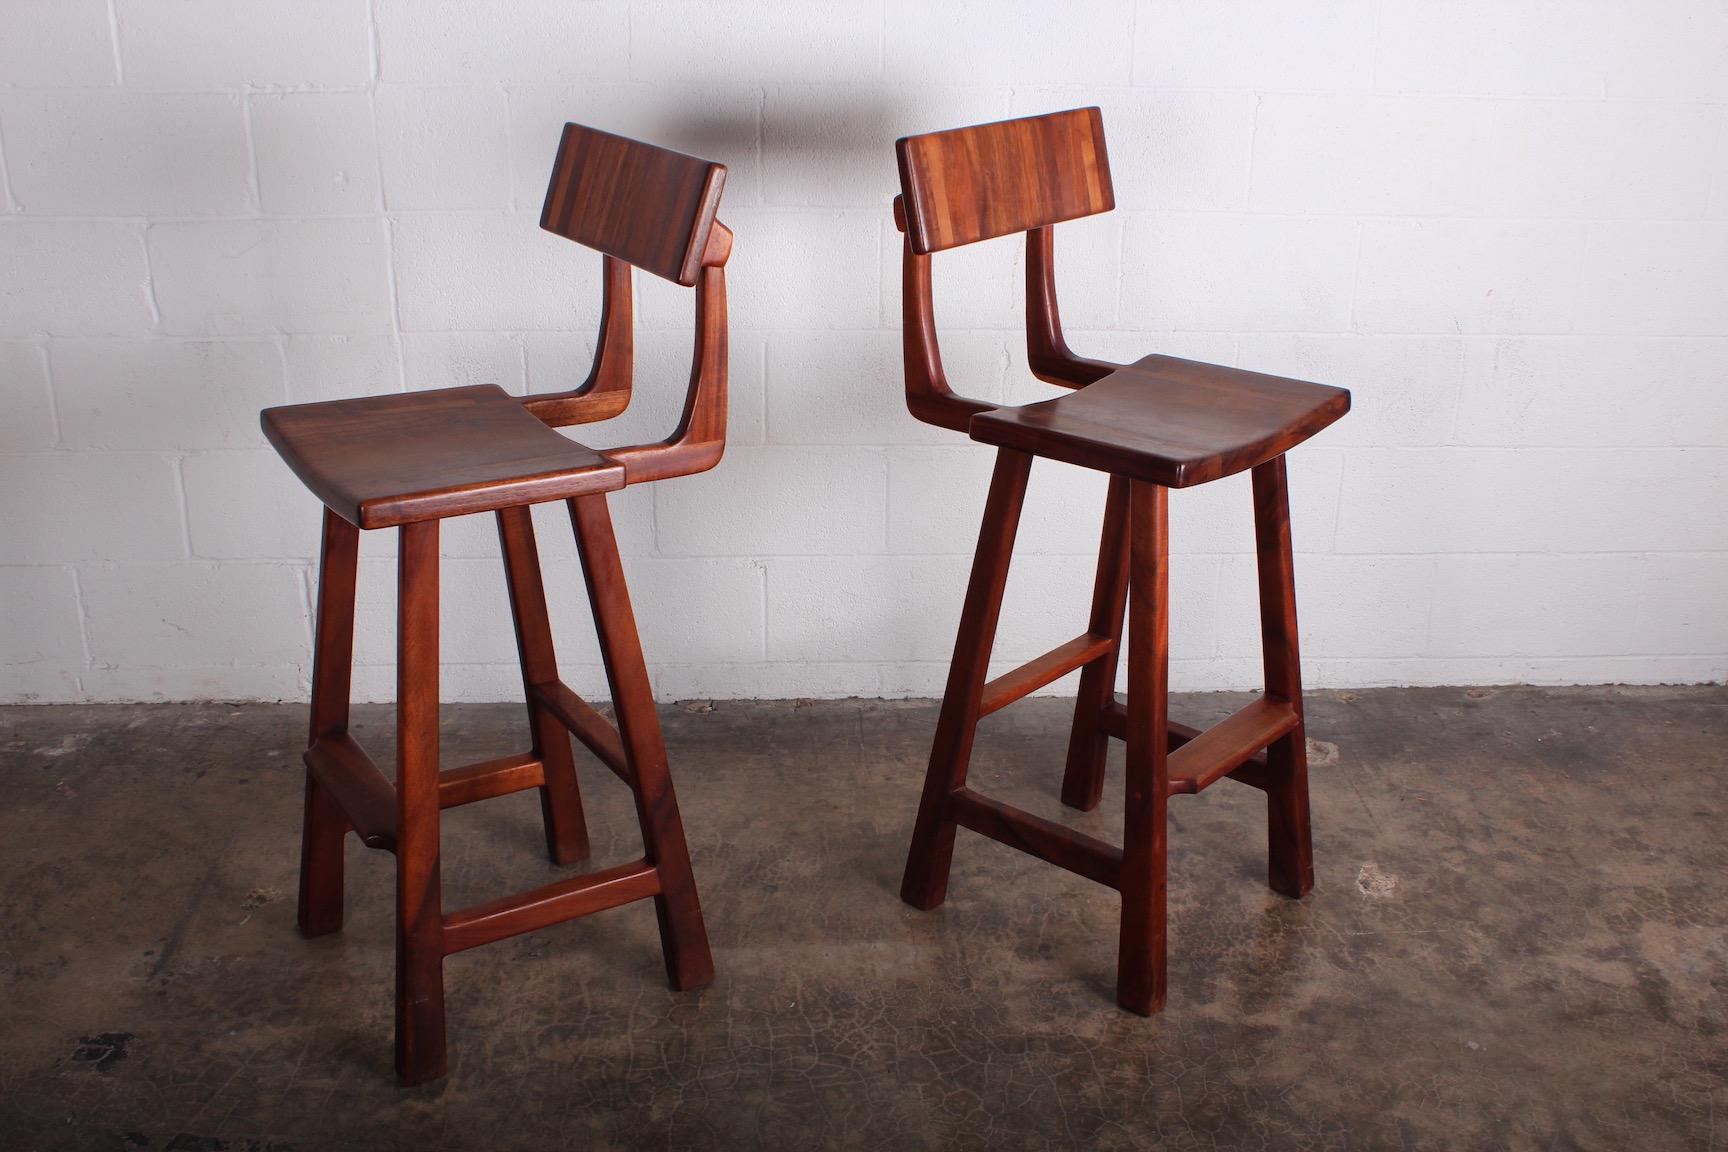 A pair of beautifully crafted barstools by Robert and Joanne Herzog, 1970s, California.